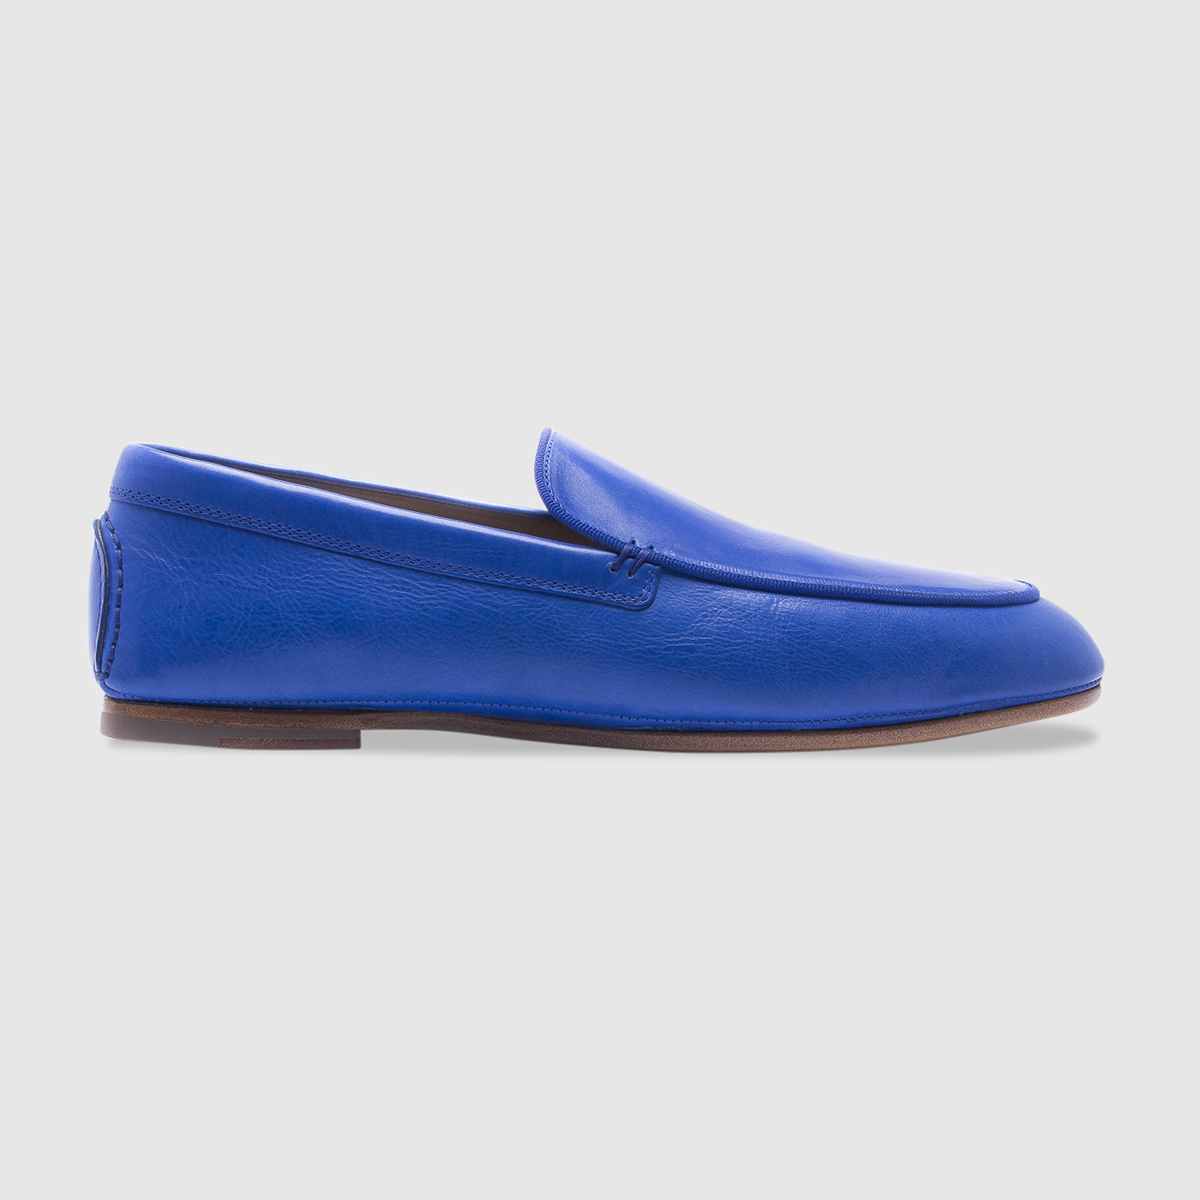 Slip-on loafer in nappa leather – sapphire blue Calò on sale 2022